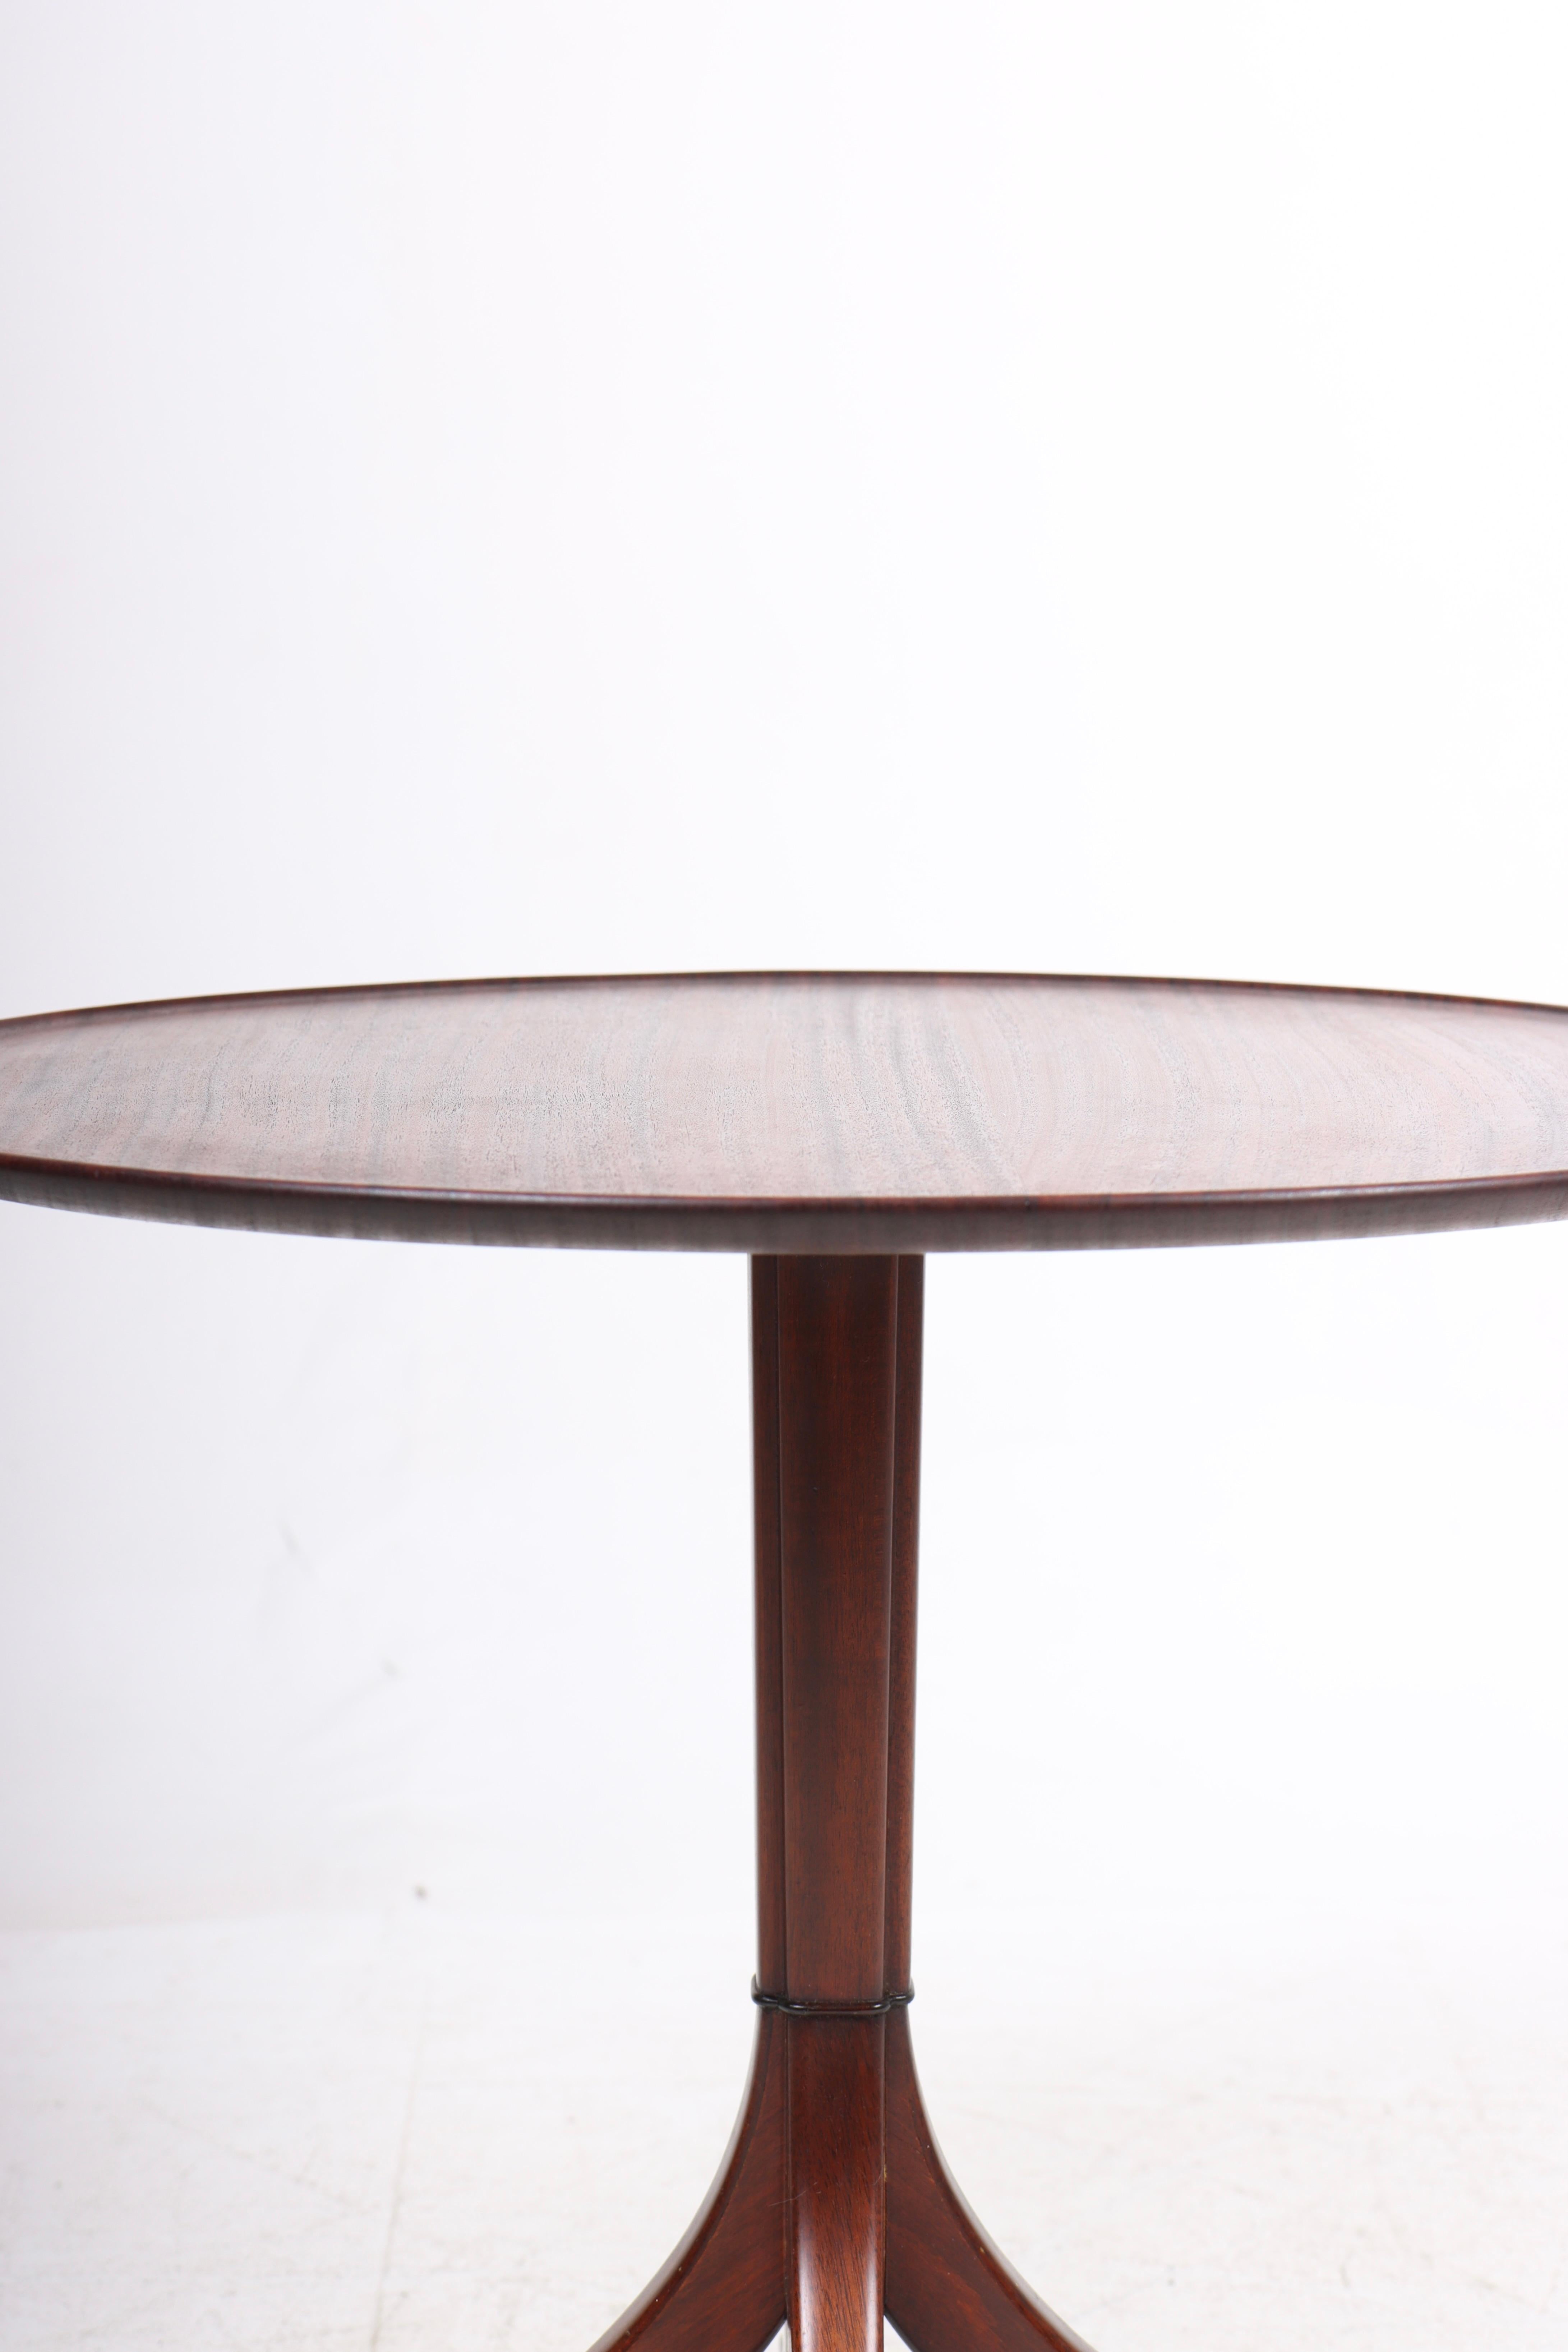 Midcentury Danish Low Table, Solid Mahogany by Cabinetmaker Frits Henningsen In Good Condition For Sale In Lejre, DK